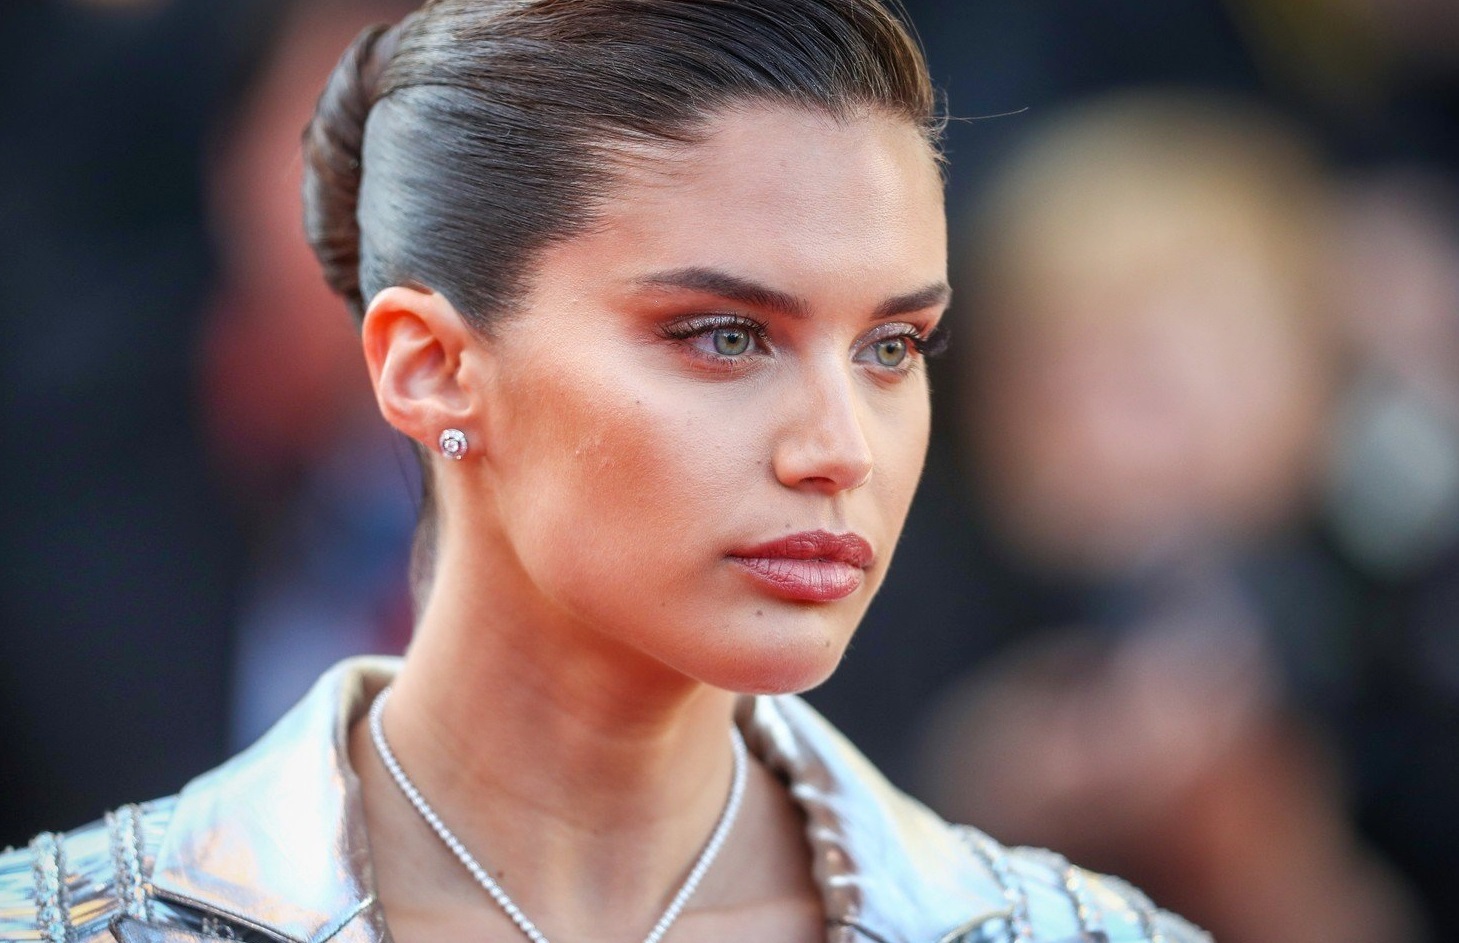 Sara Sampaio attends the screening of "Rocket Man" during the 72nd annual Cannes Film Festival on May 16, 2019 in Cannes, France.